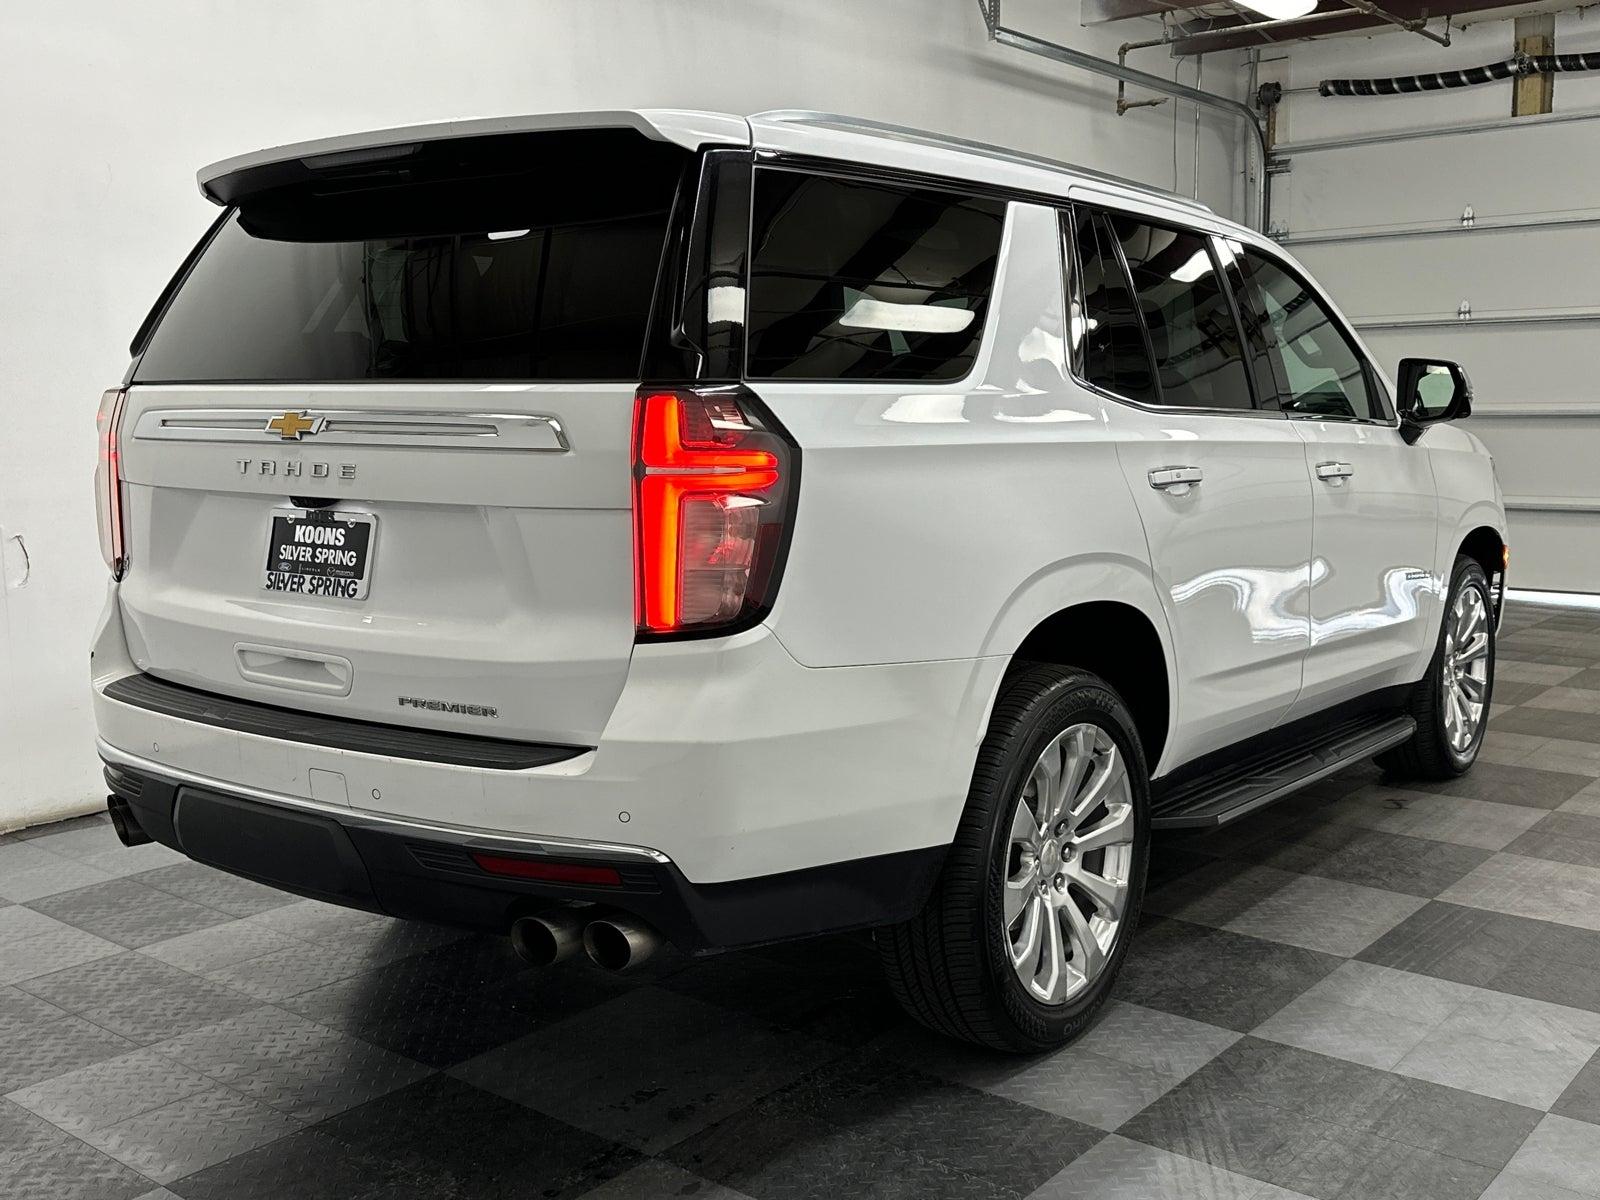 2021 Chevrolet Tahoe Photo in Bethesda, MD 20814